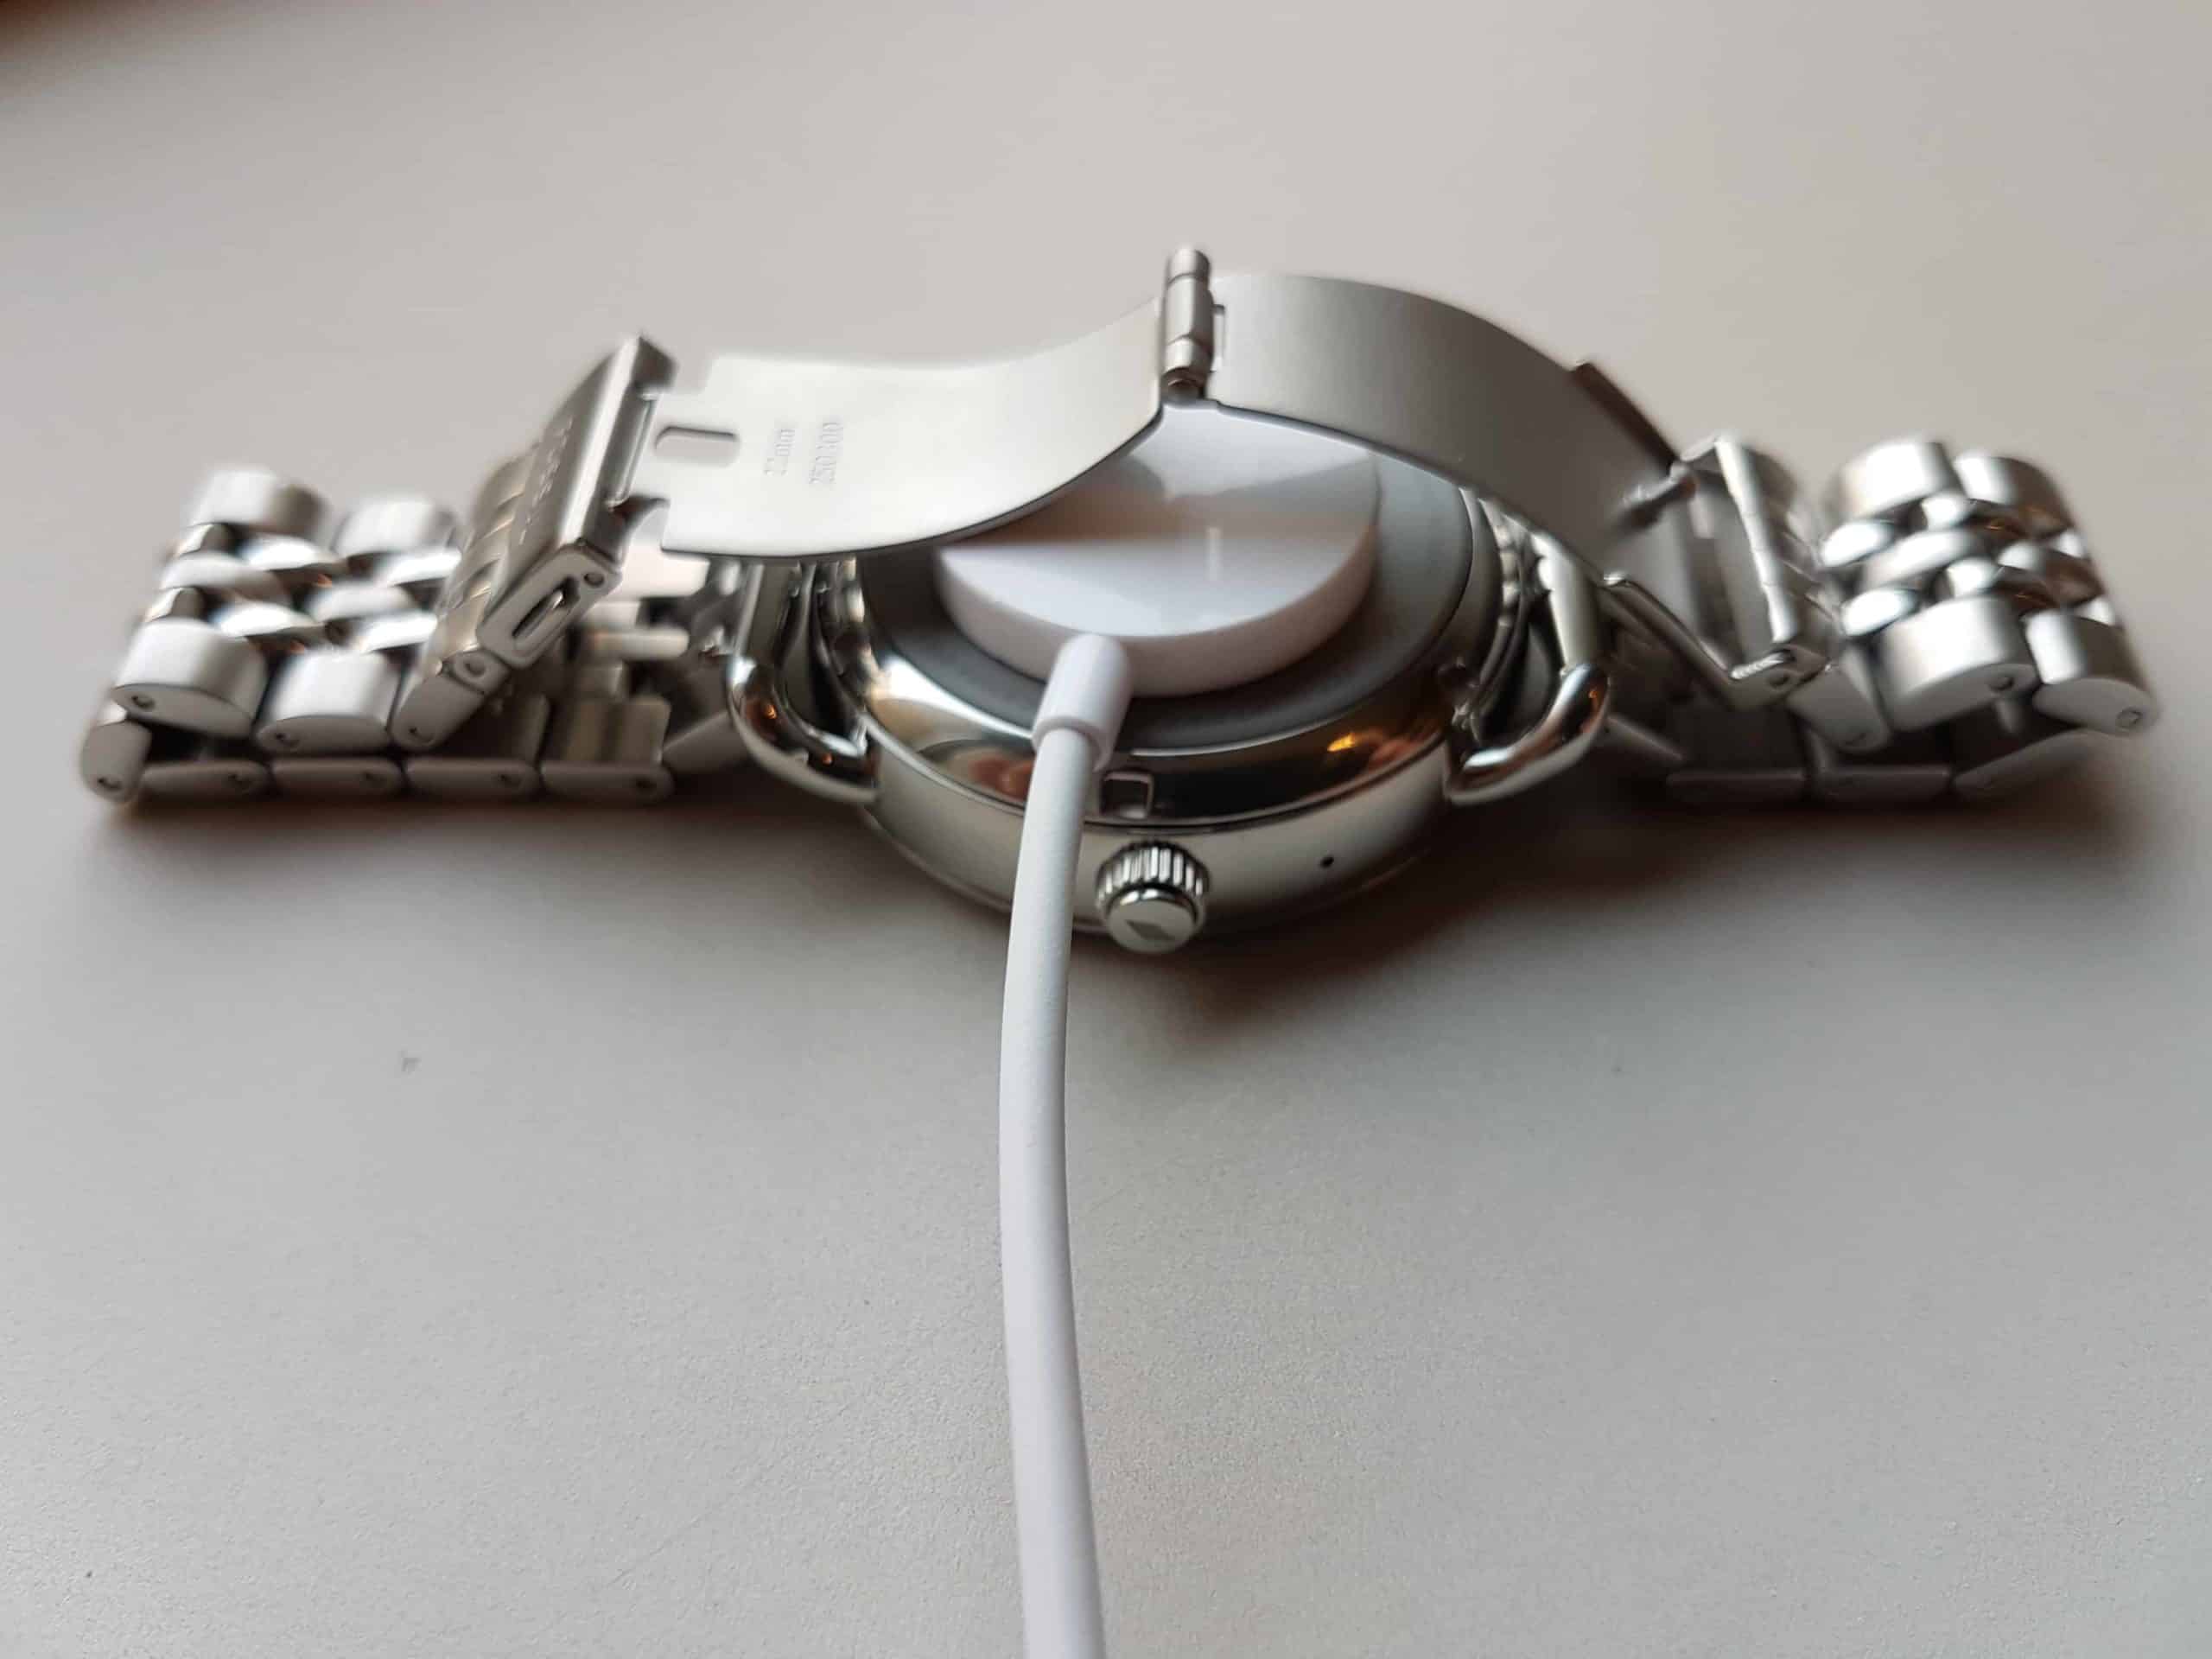 A Fossil Q smartwatch with connected charger.